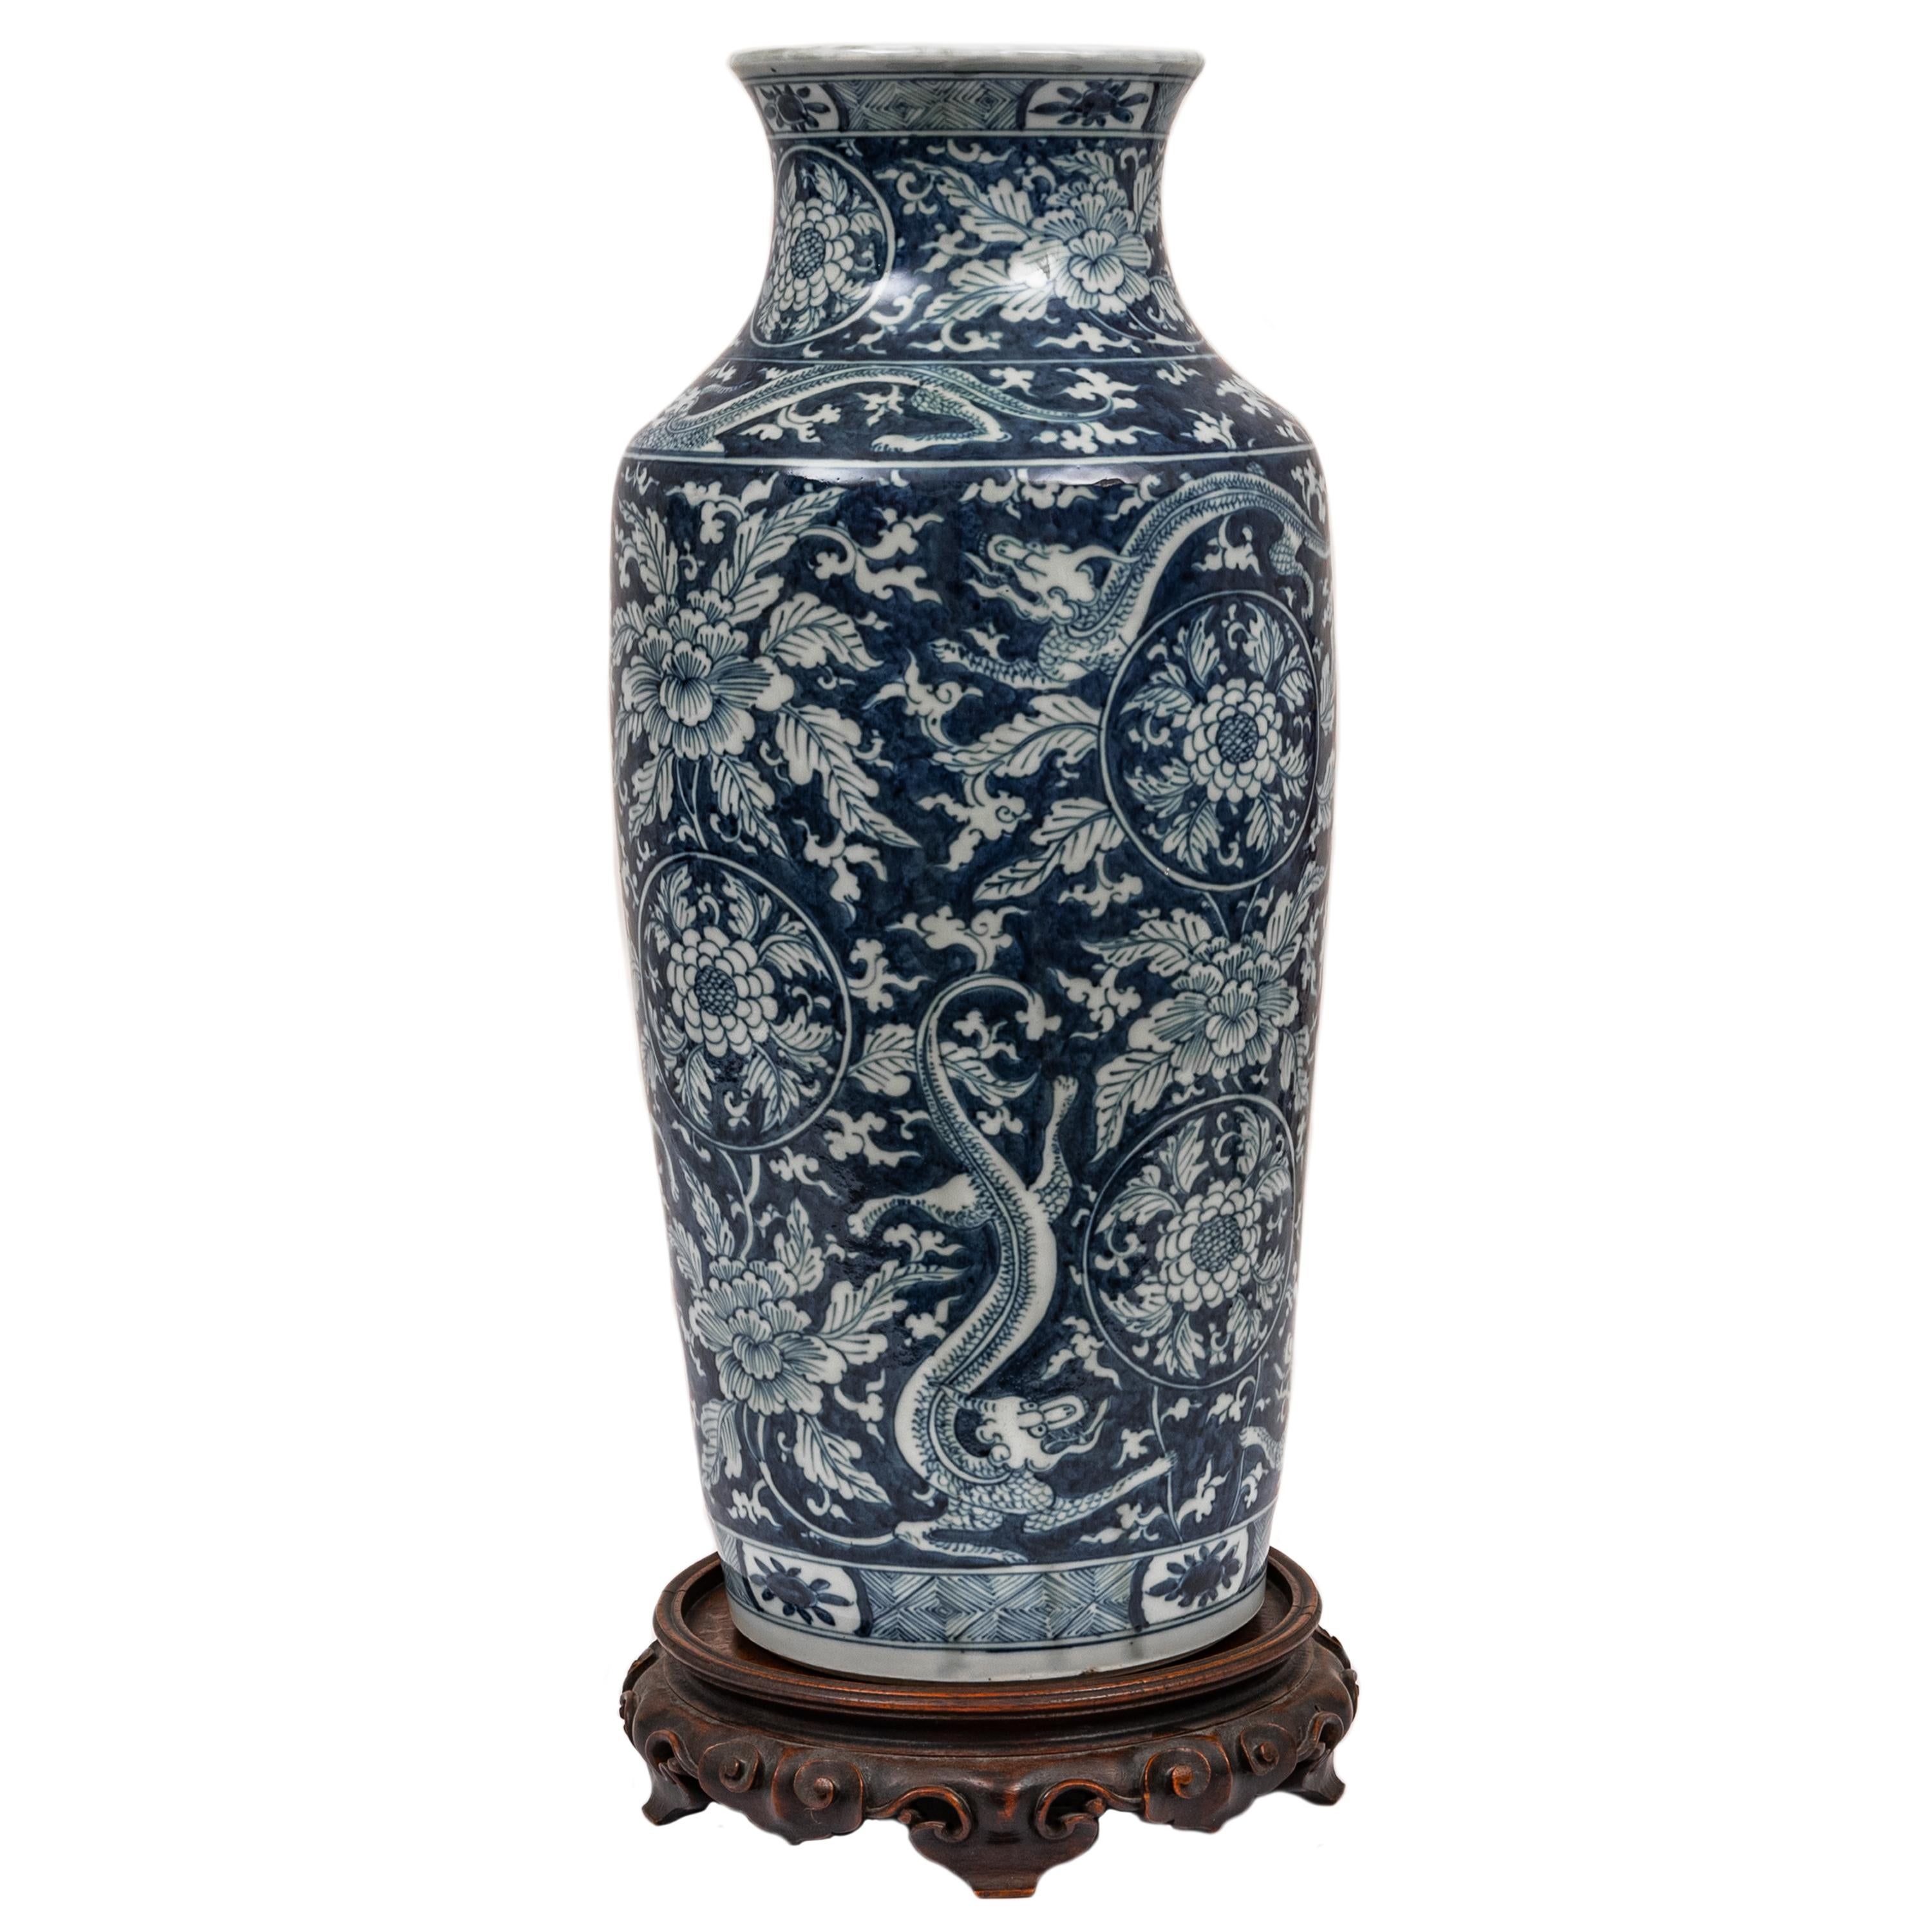 Antique Blue White Chinese Porcelain Qing Dynasty Kangxi Period Dragon Vase 1680 In Good Condition For Sale In Portland, OR